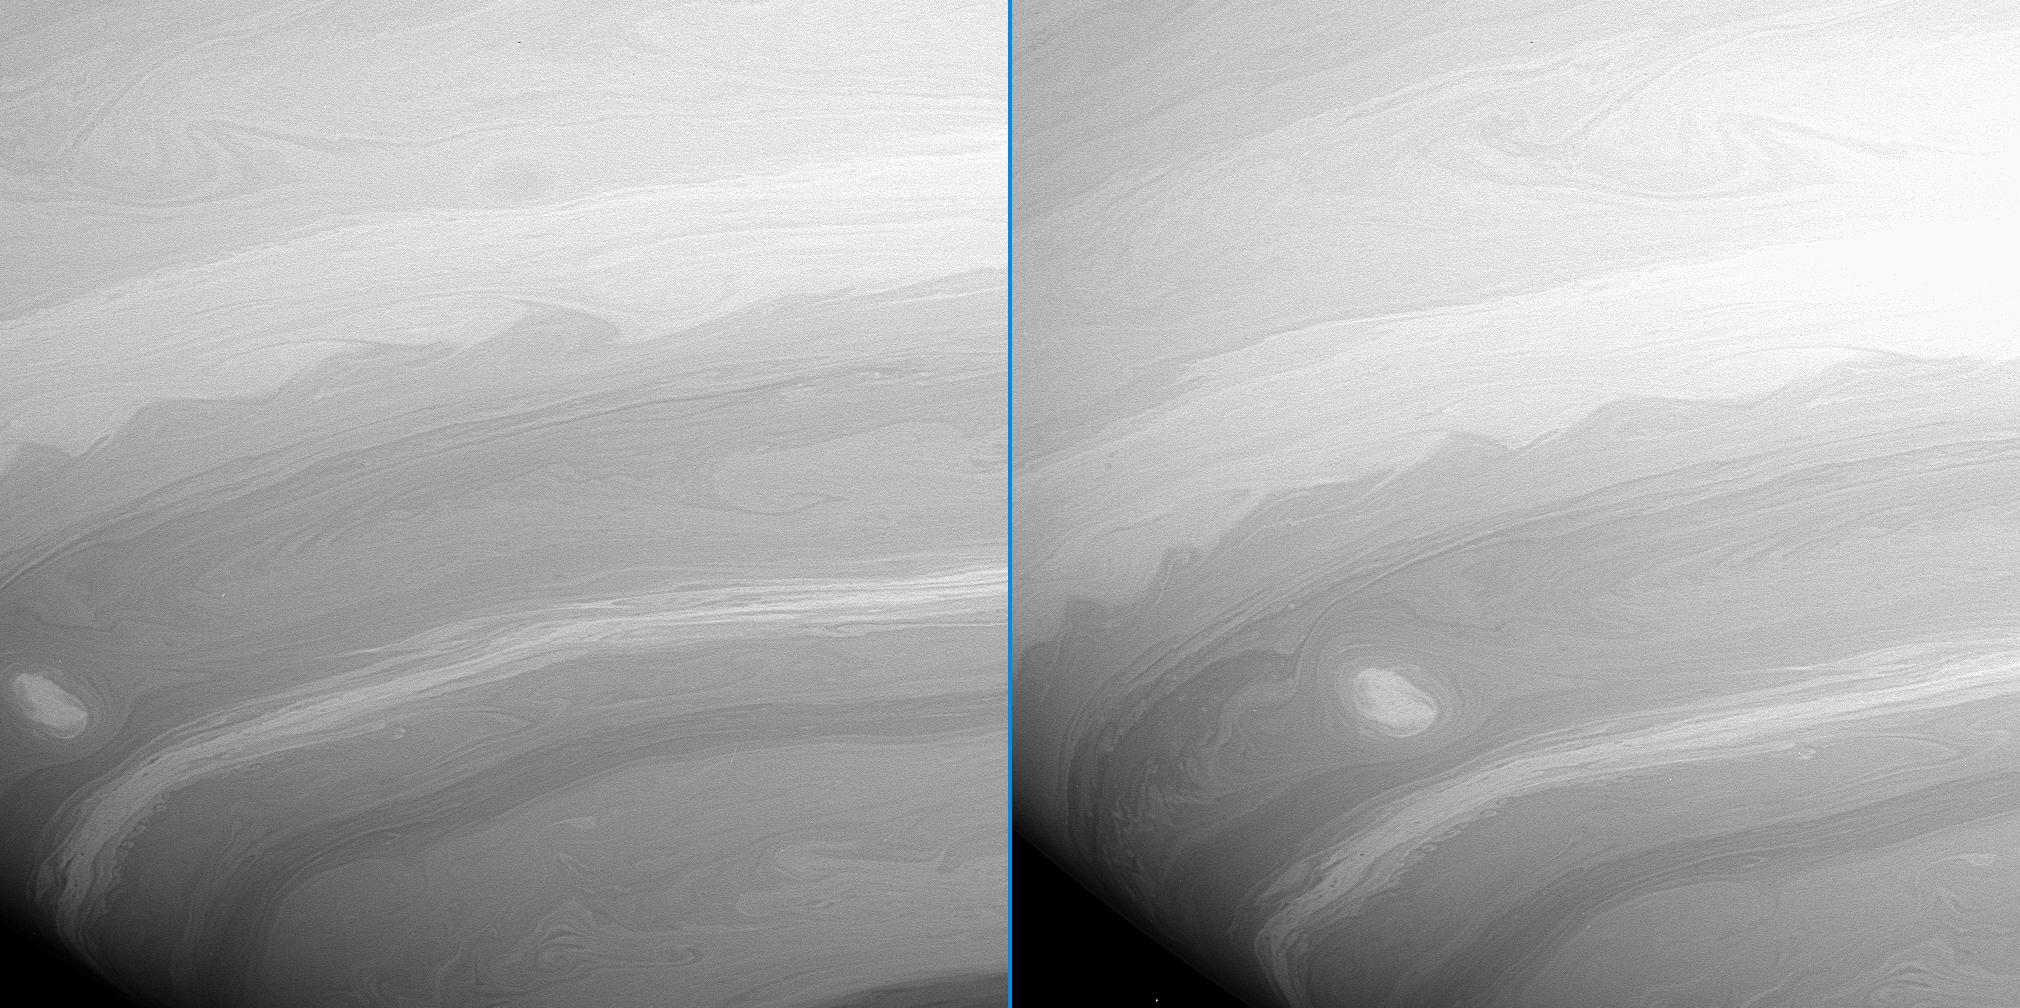 two images of Saturn showing vortices and turbulent wake's in the atmosphere